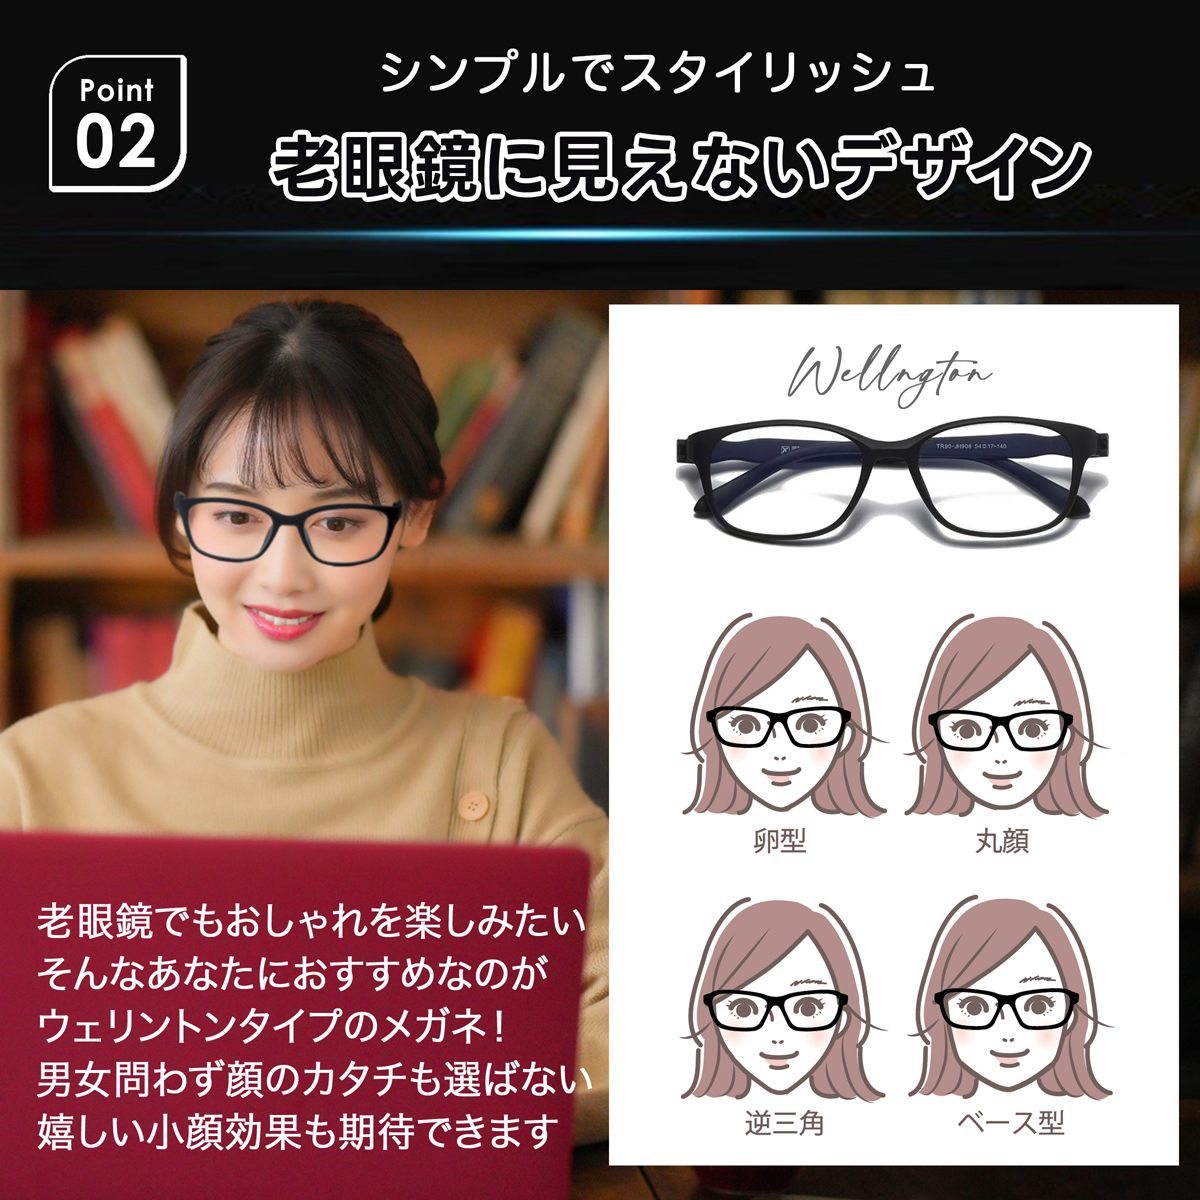 [ now only sale memory price ] farsighted glasses glasses leading glass stylish blue light cut sini Agras men's lady's 